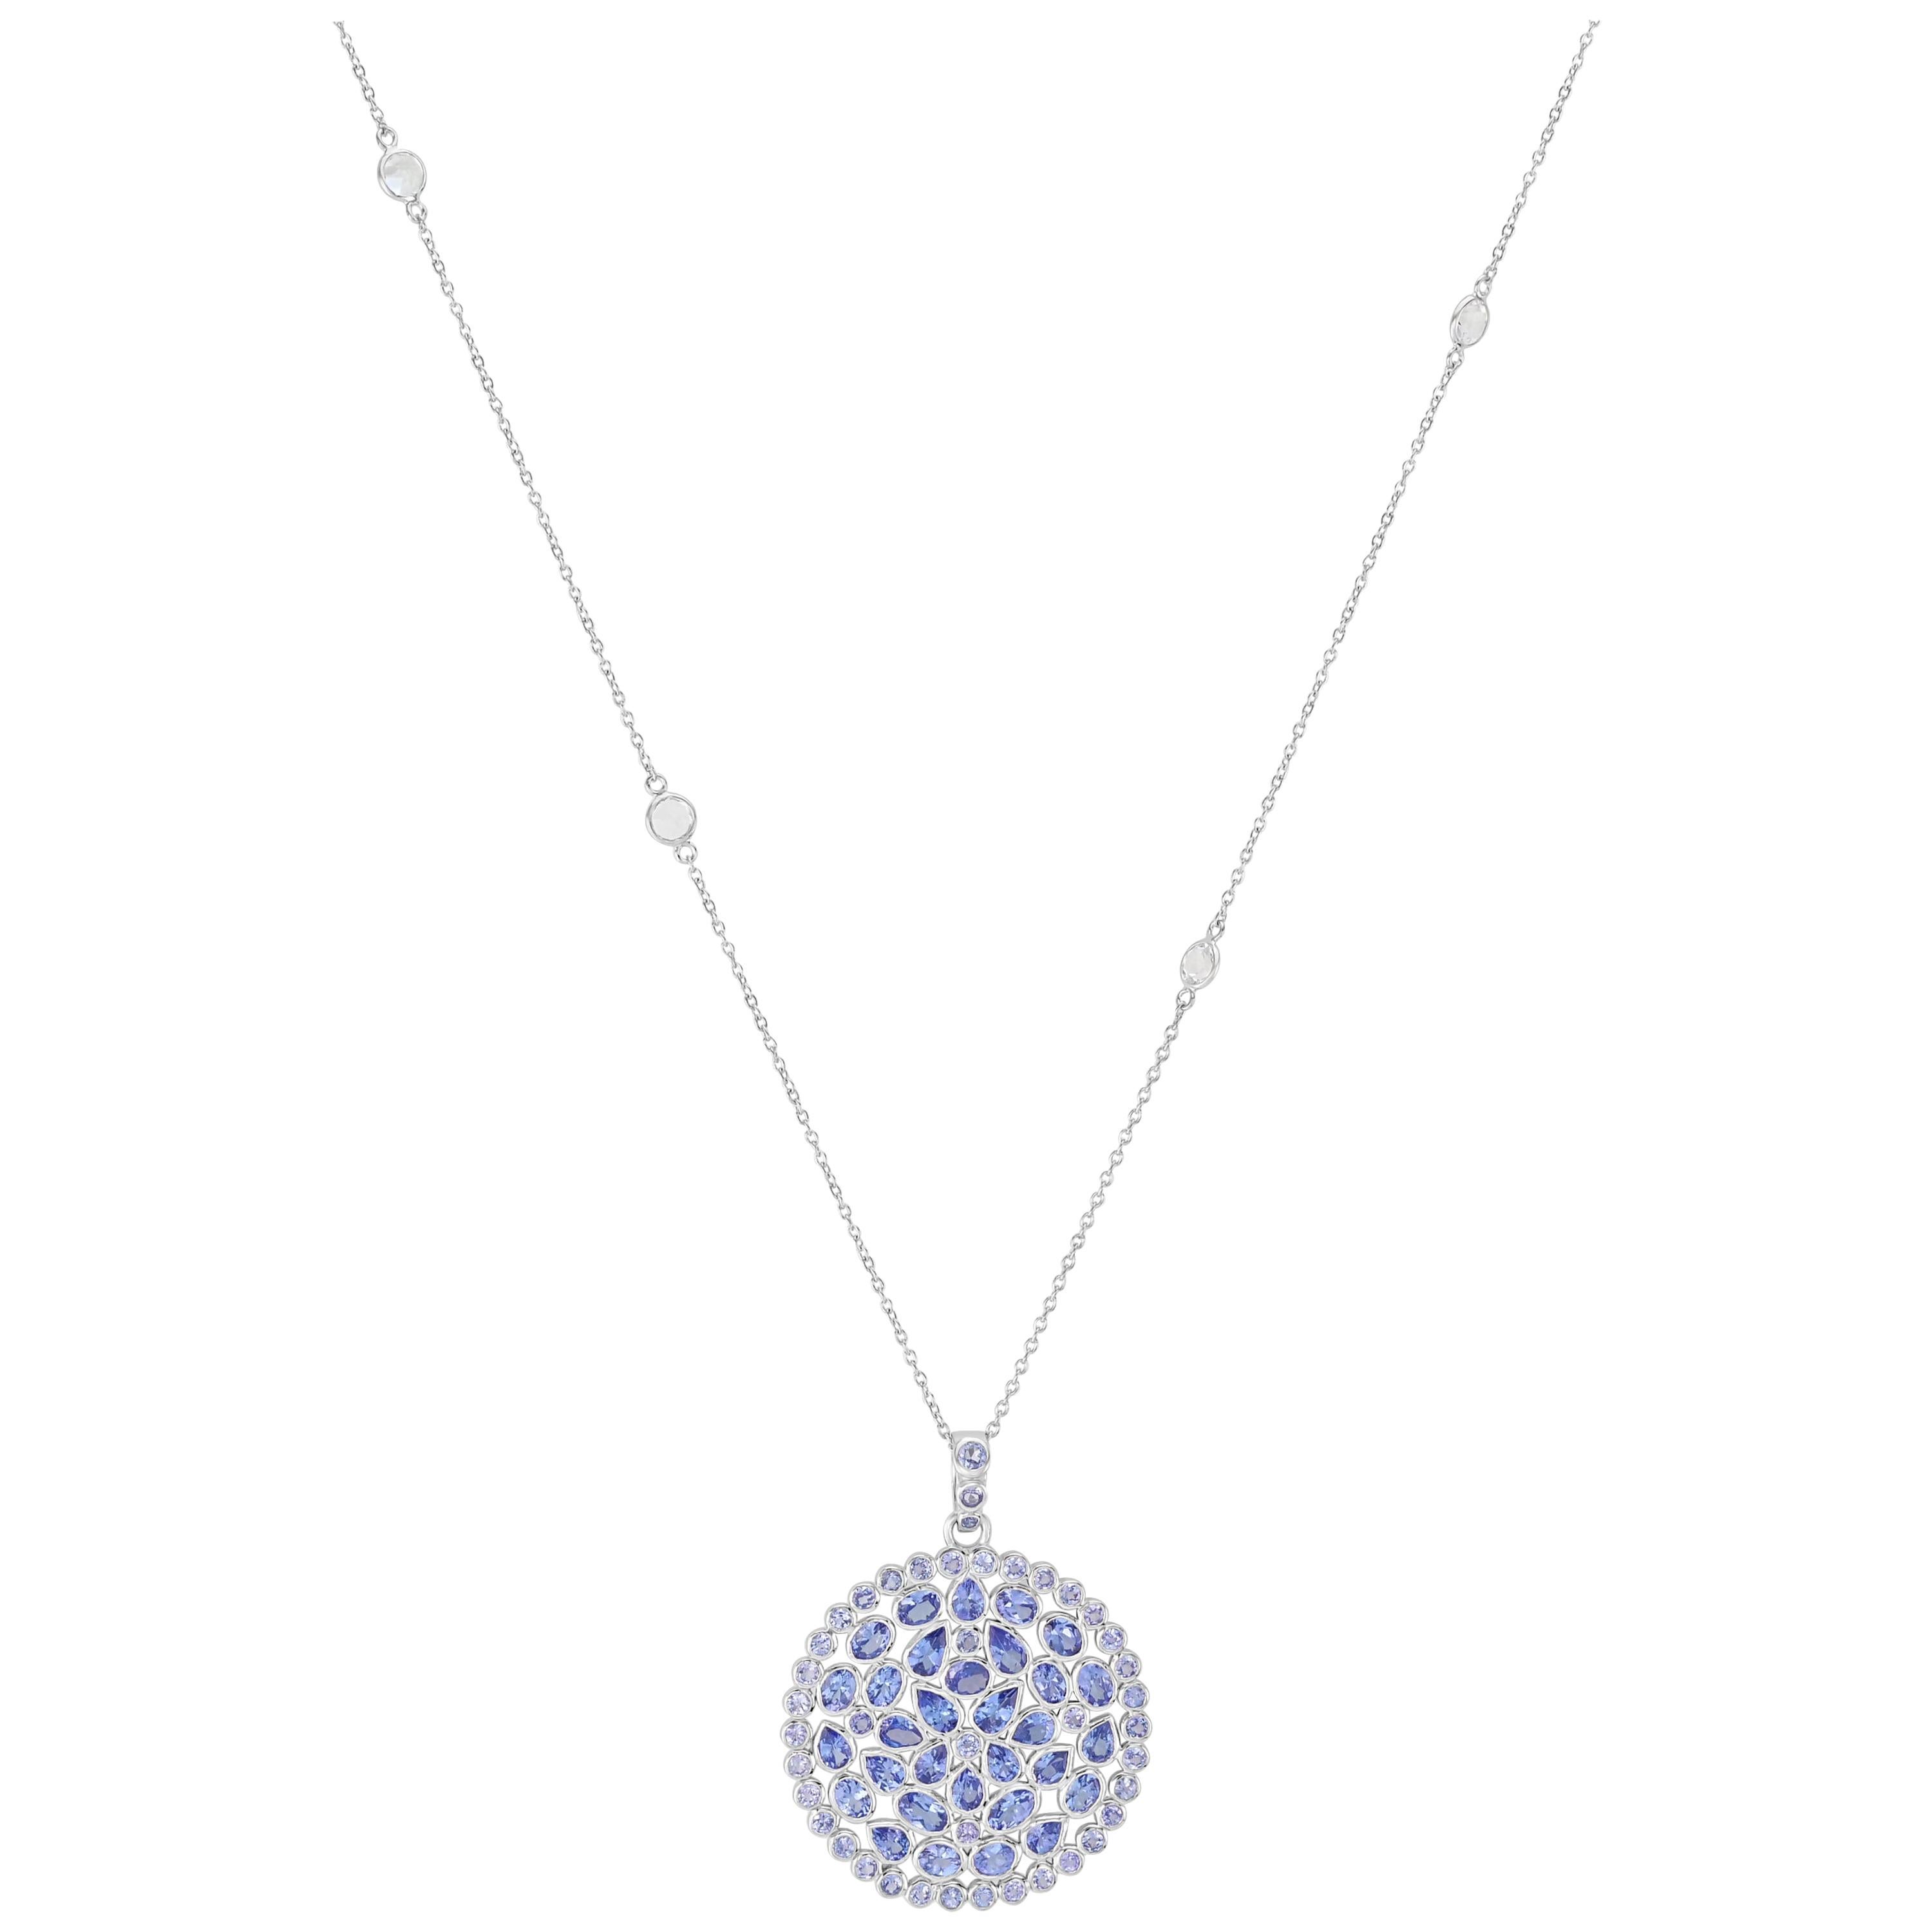 Tanzanite and White Topaz Pendant Necklace in Sterling Silver